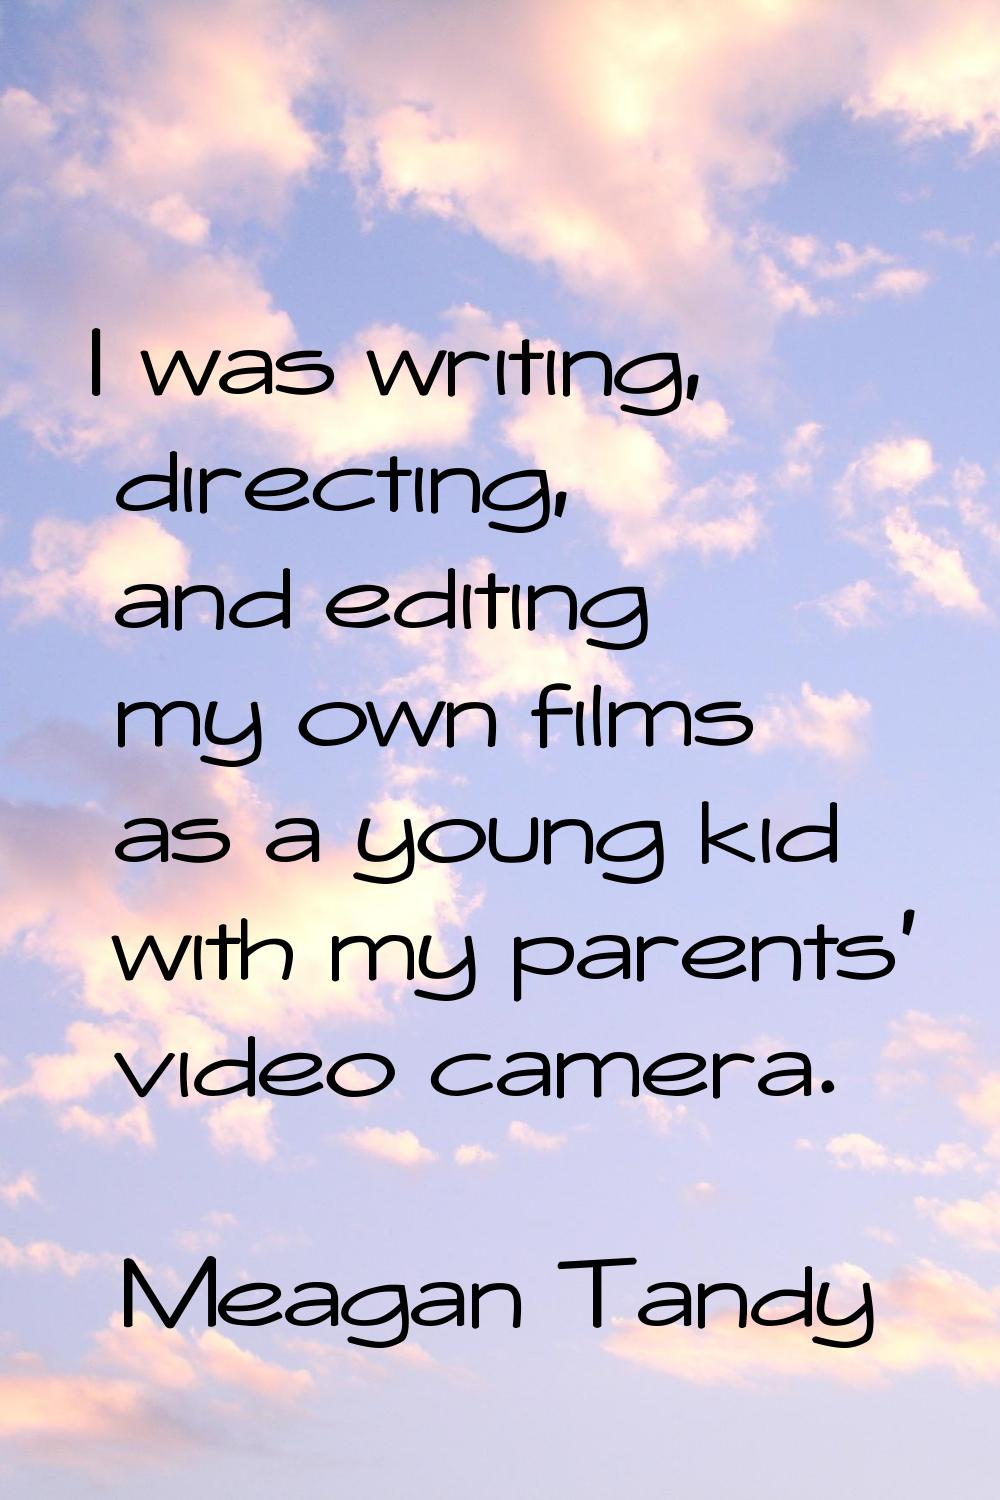 I was writing, directing, and editing my own films as a young kid with my parents' video camera.